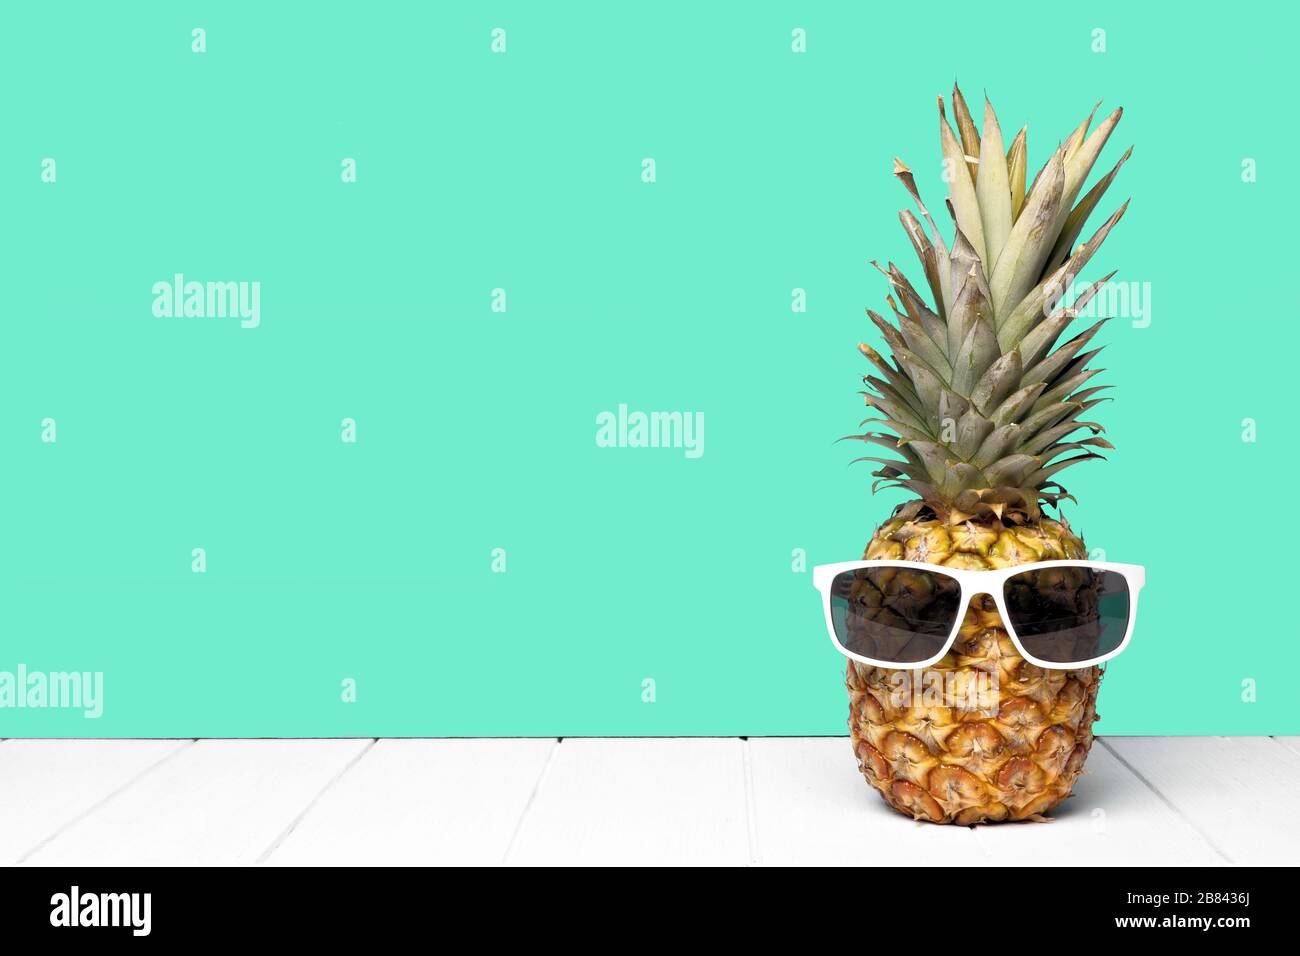 Hipster pineapple with sunglasses against a teal colored background. Minimal summer concept. Stock Photo